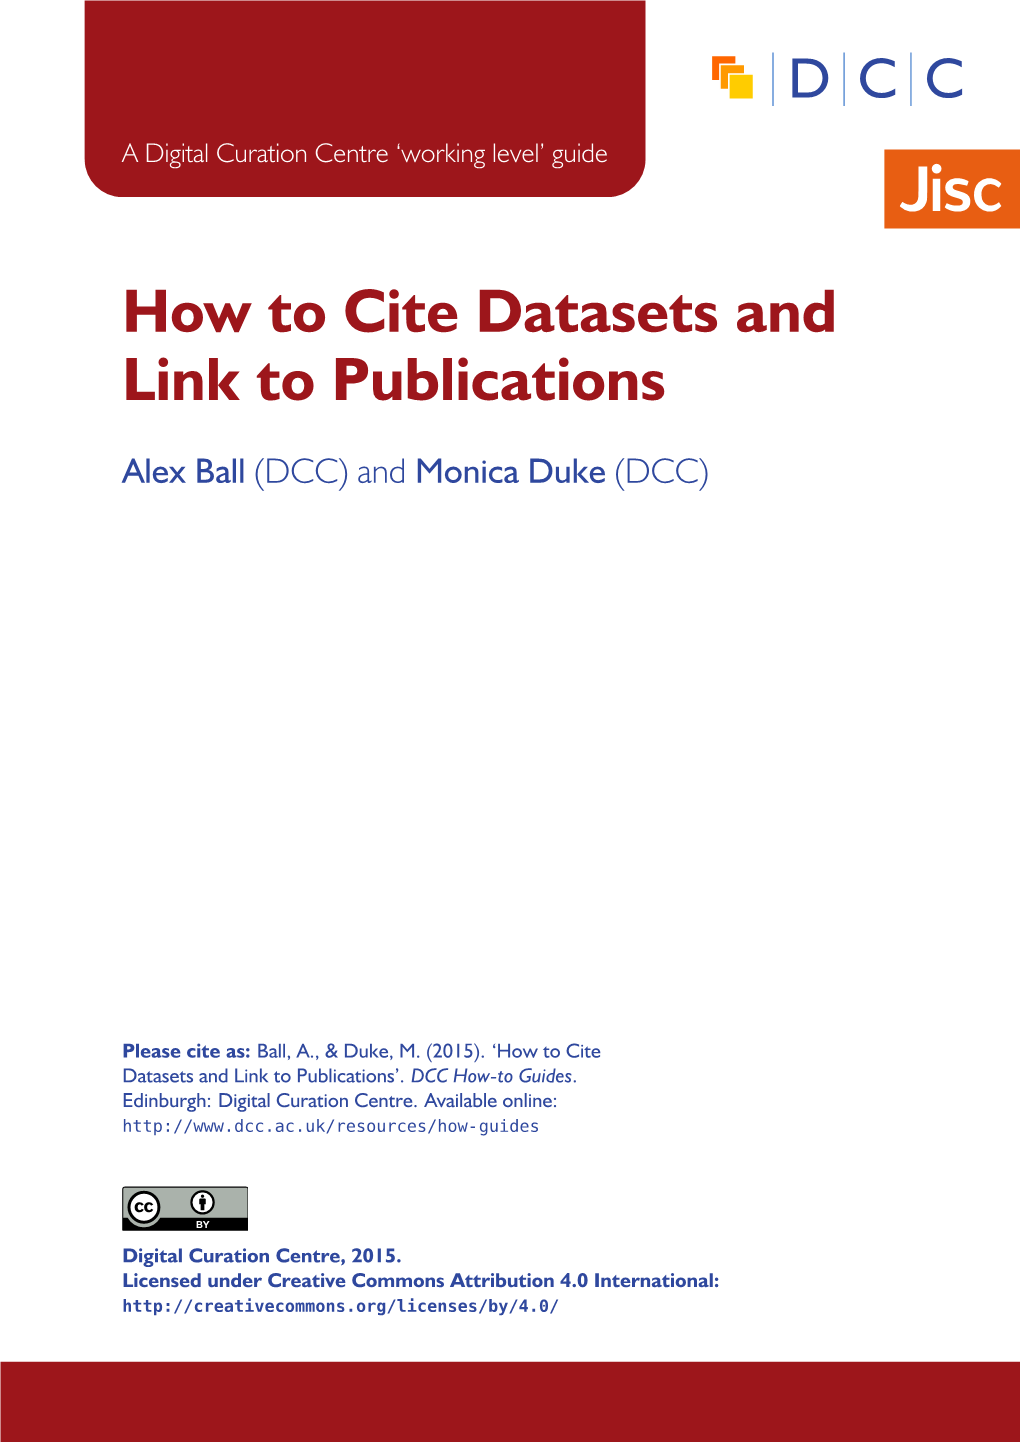 How to Cite Datasets and Link to Publications